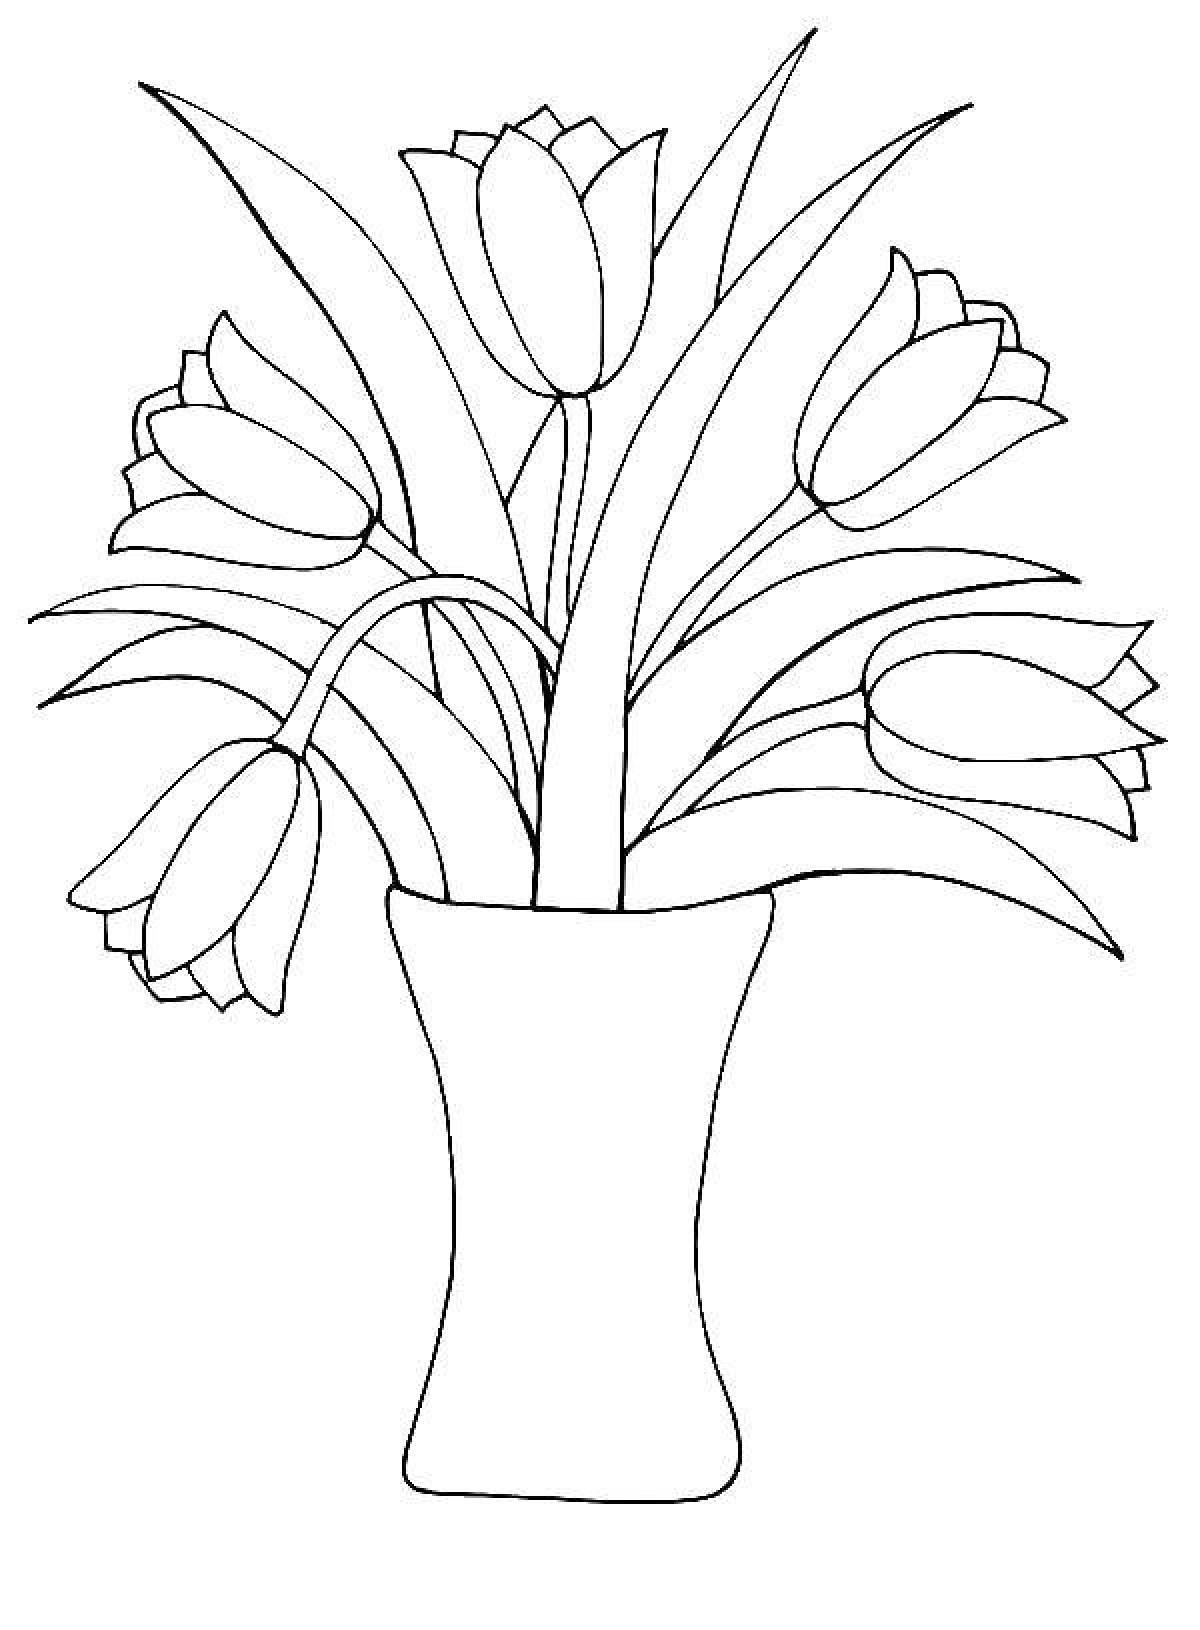 Coloring page tulips in a vase